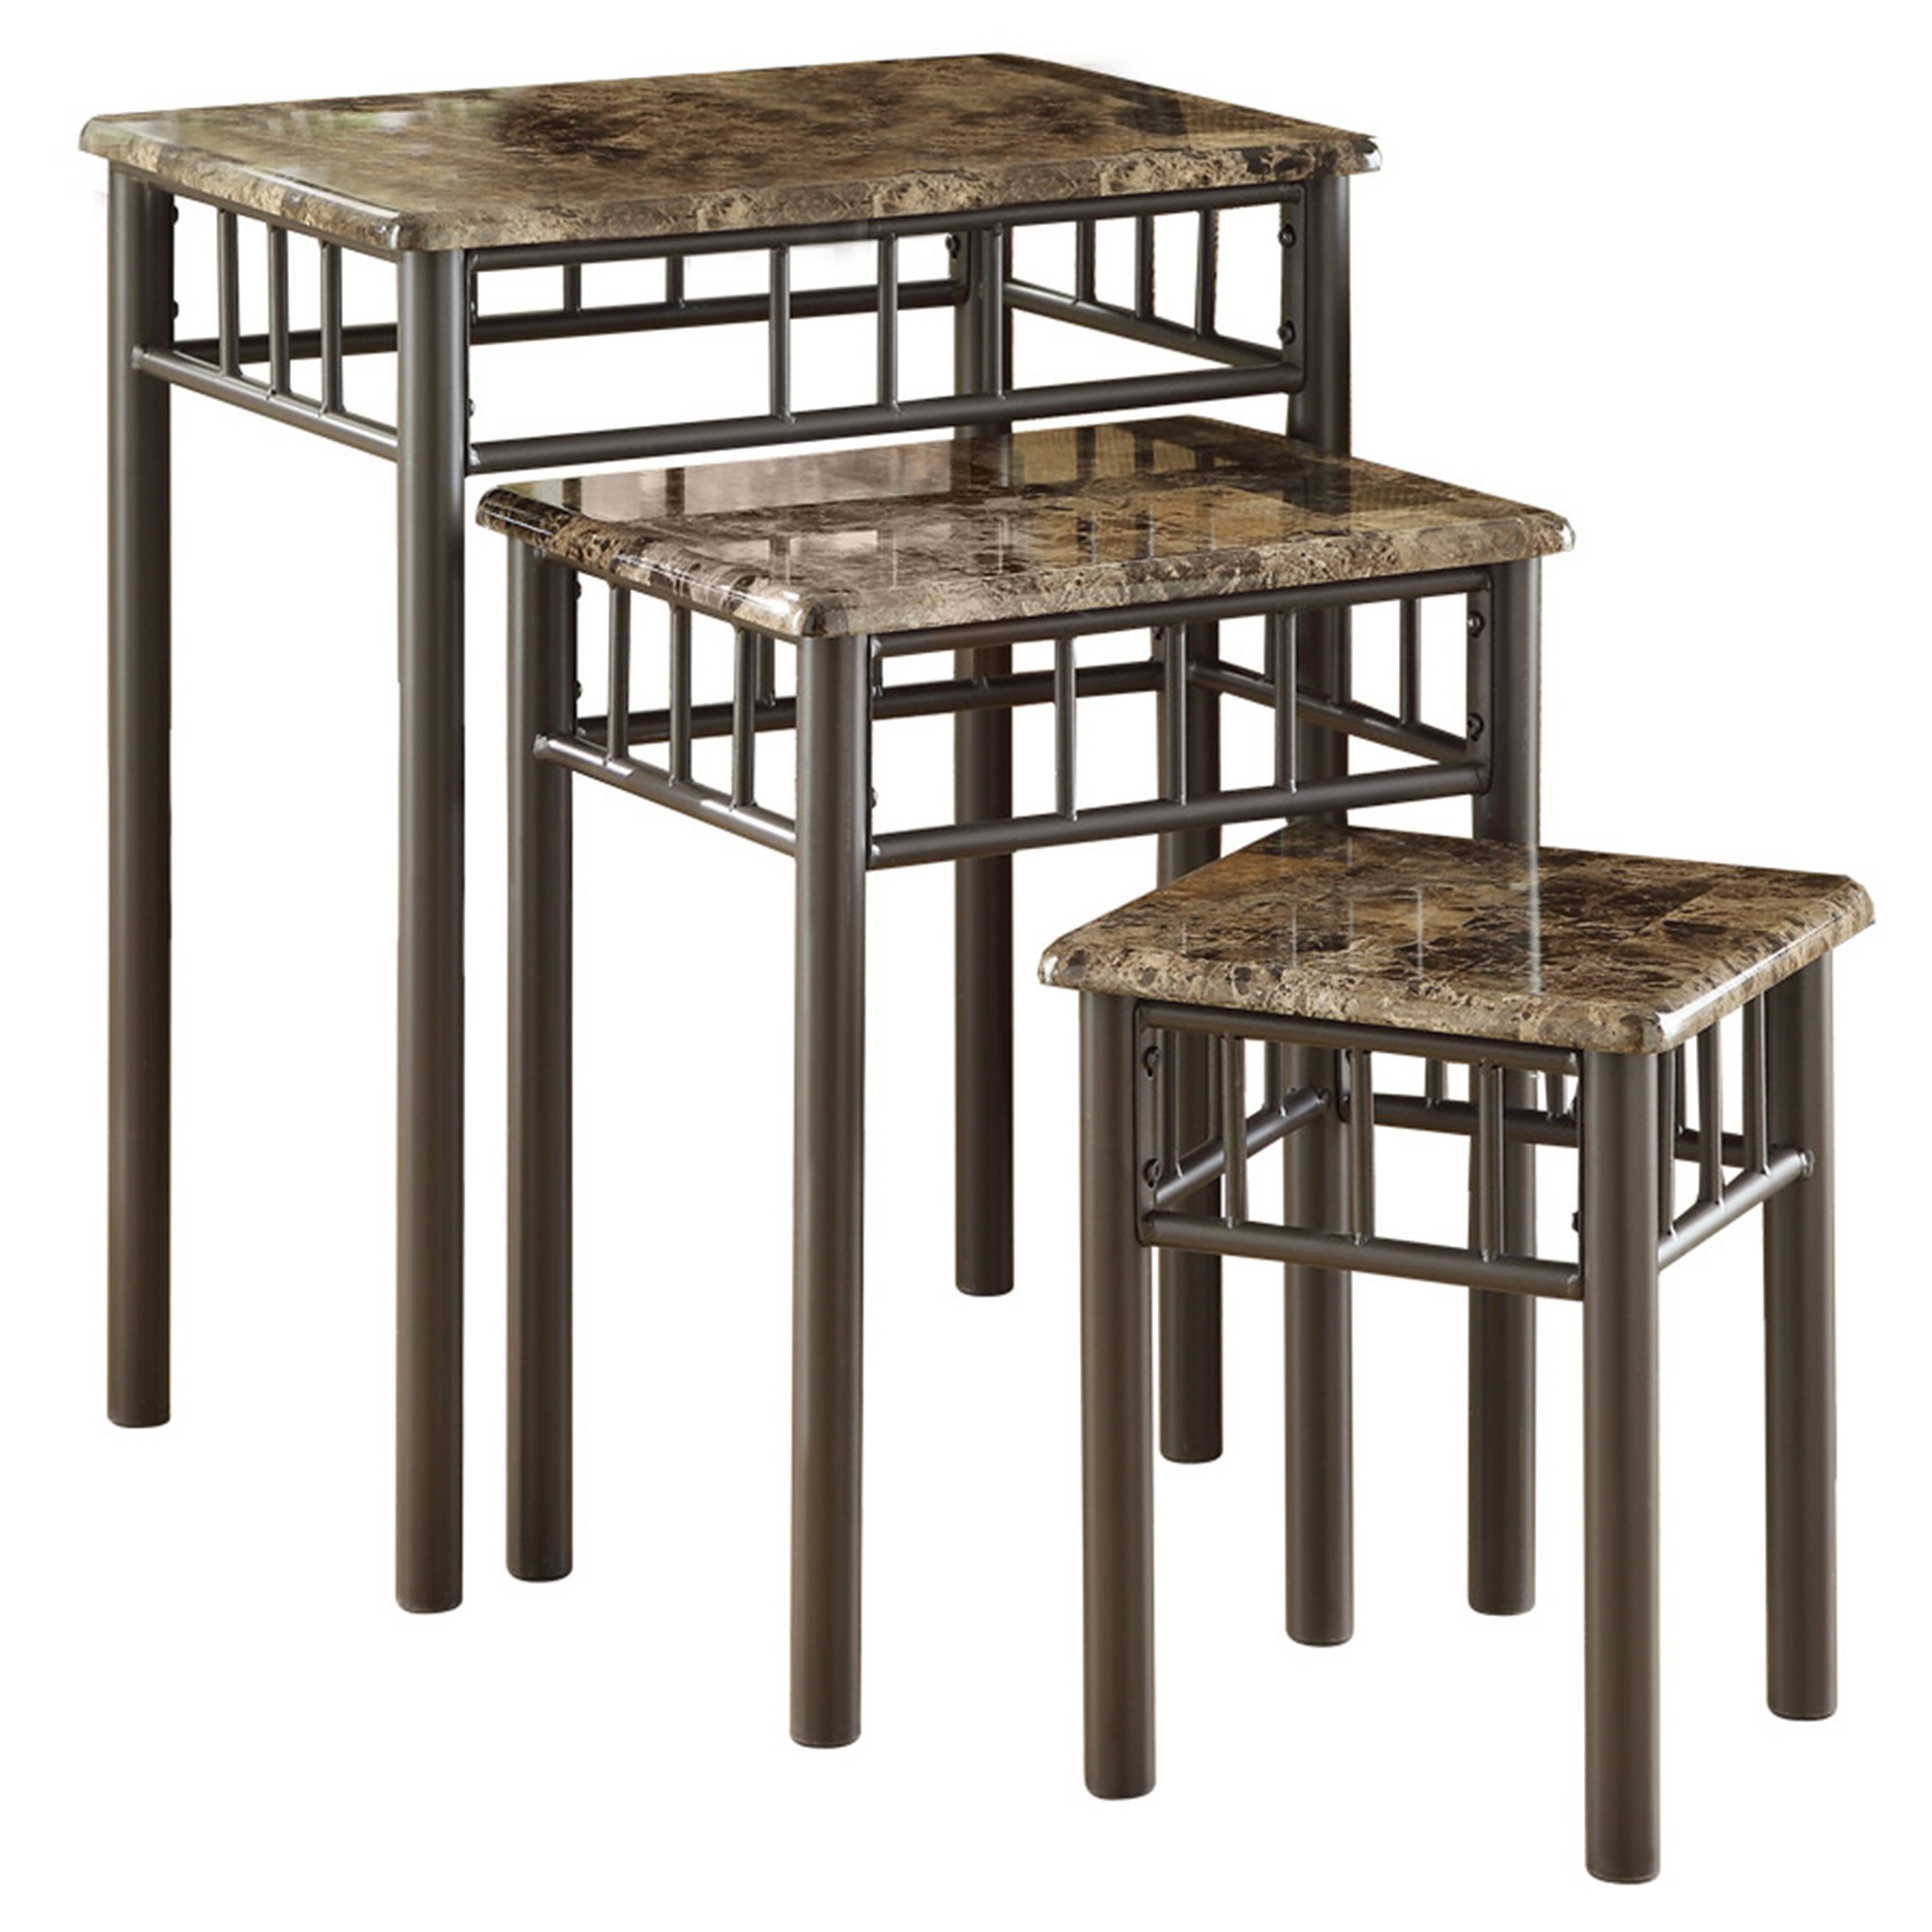 44" x 53" x 66" Cappuccino Marble-Look Finish and Bronze Metal Nesting Table - Set of 3